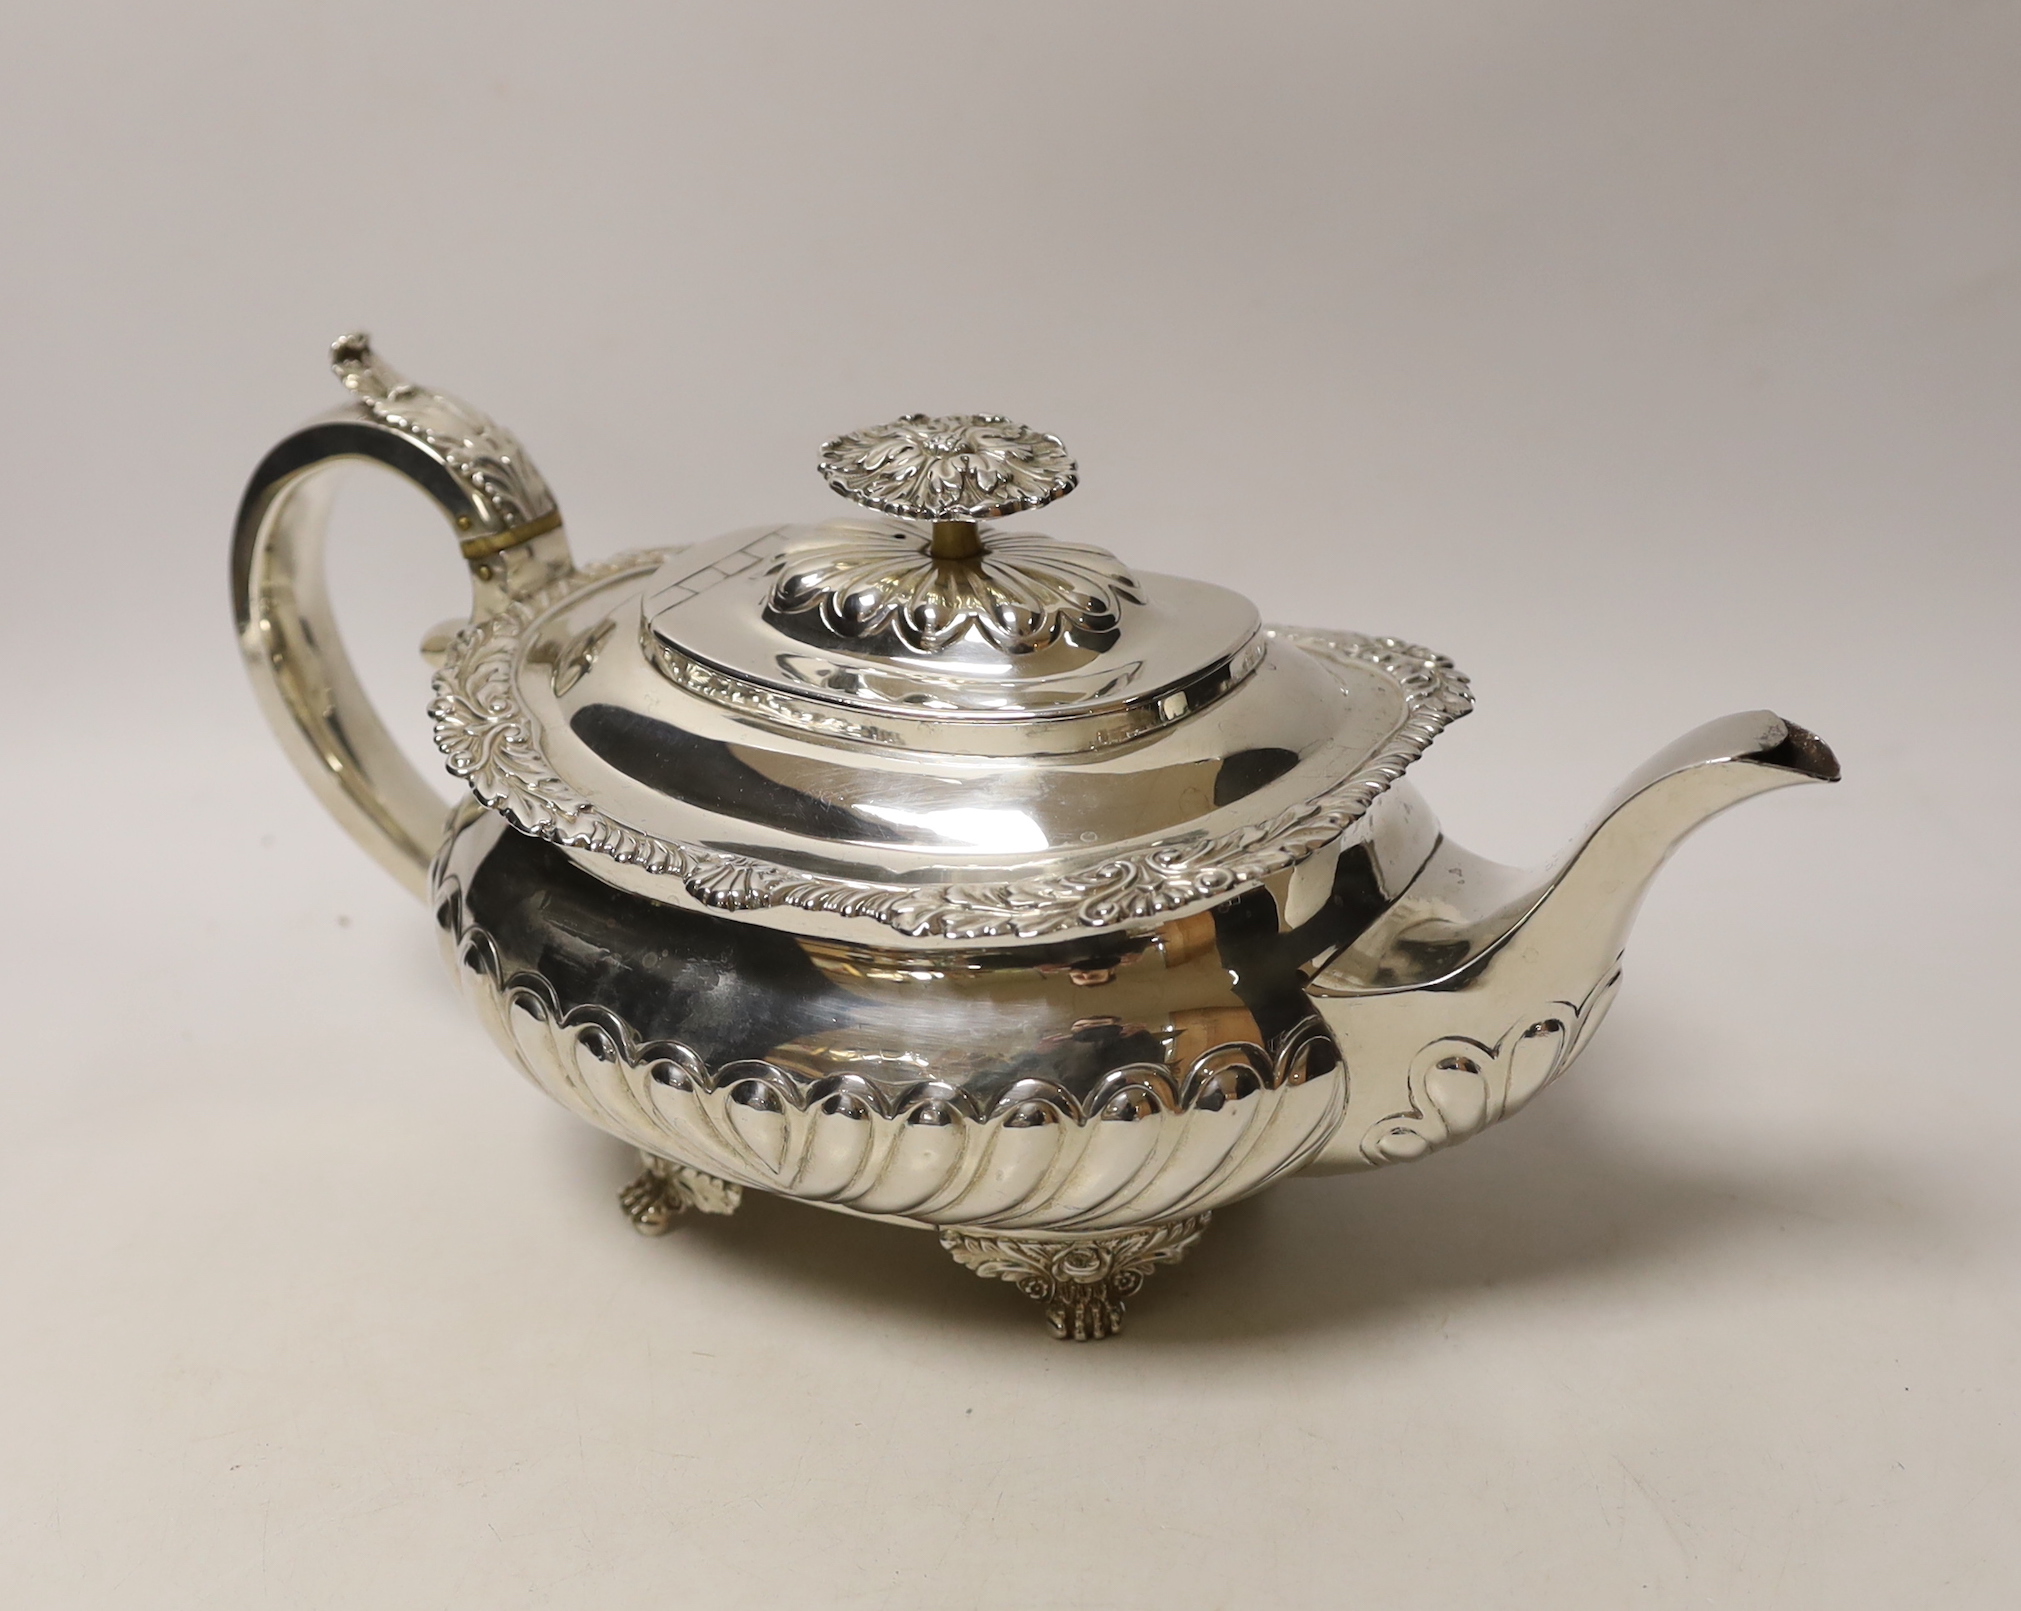 A George IV demi-fluted silver oval tea pot, maker RP, London, 1823, gross weight 23.2oz, CITES Submission reference, 4XP4B3AZ